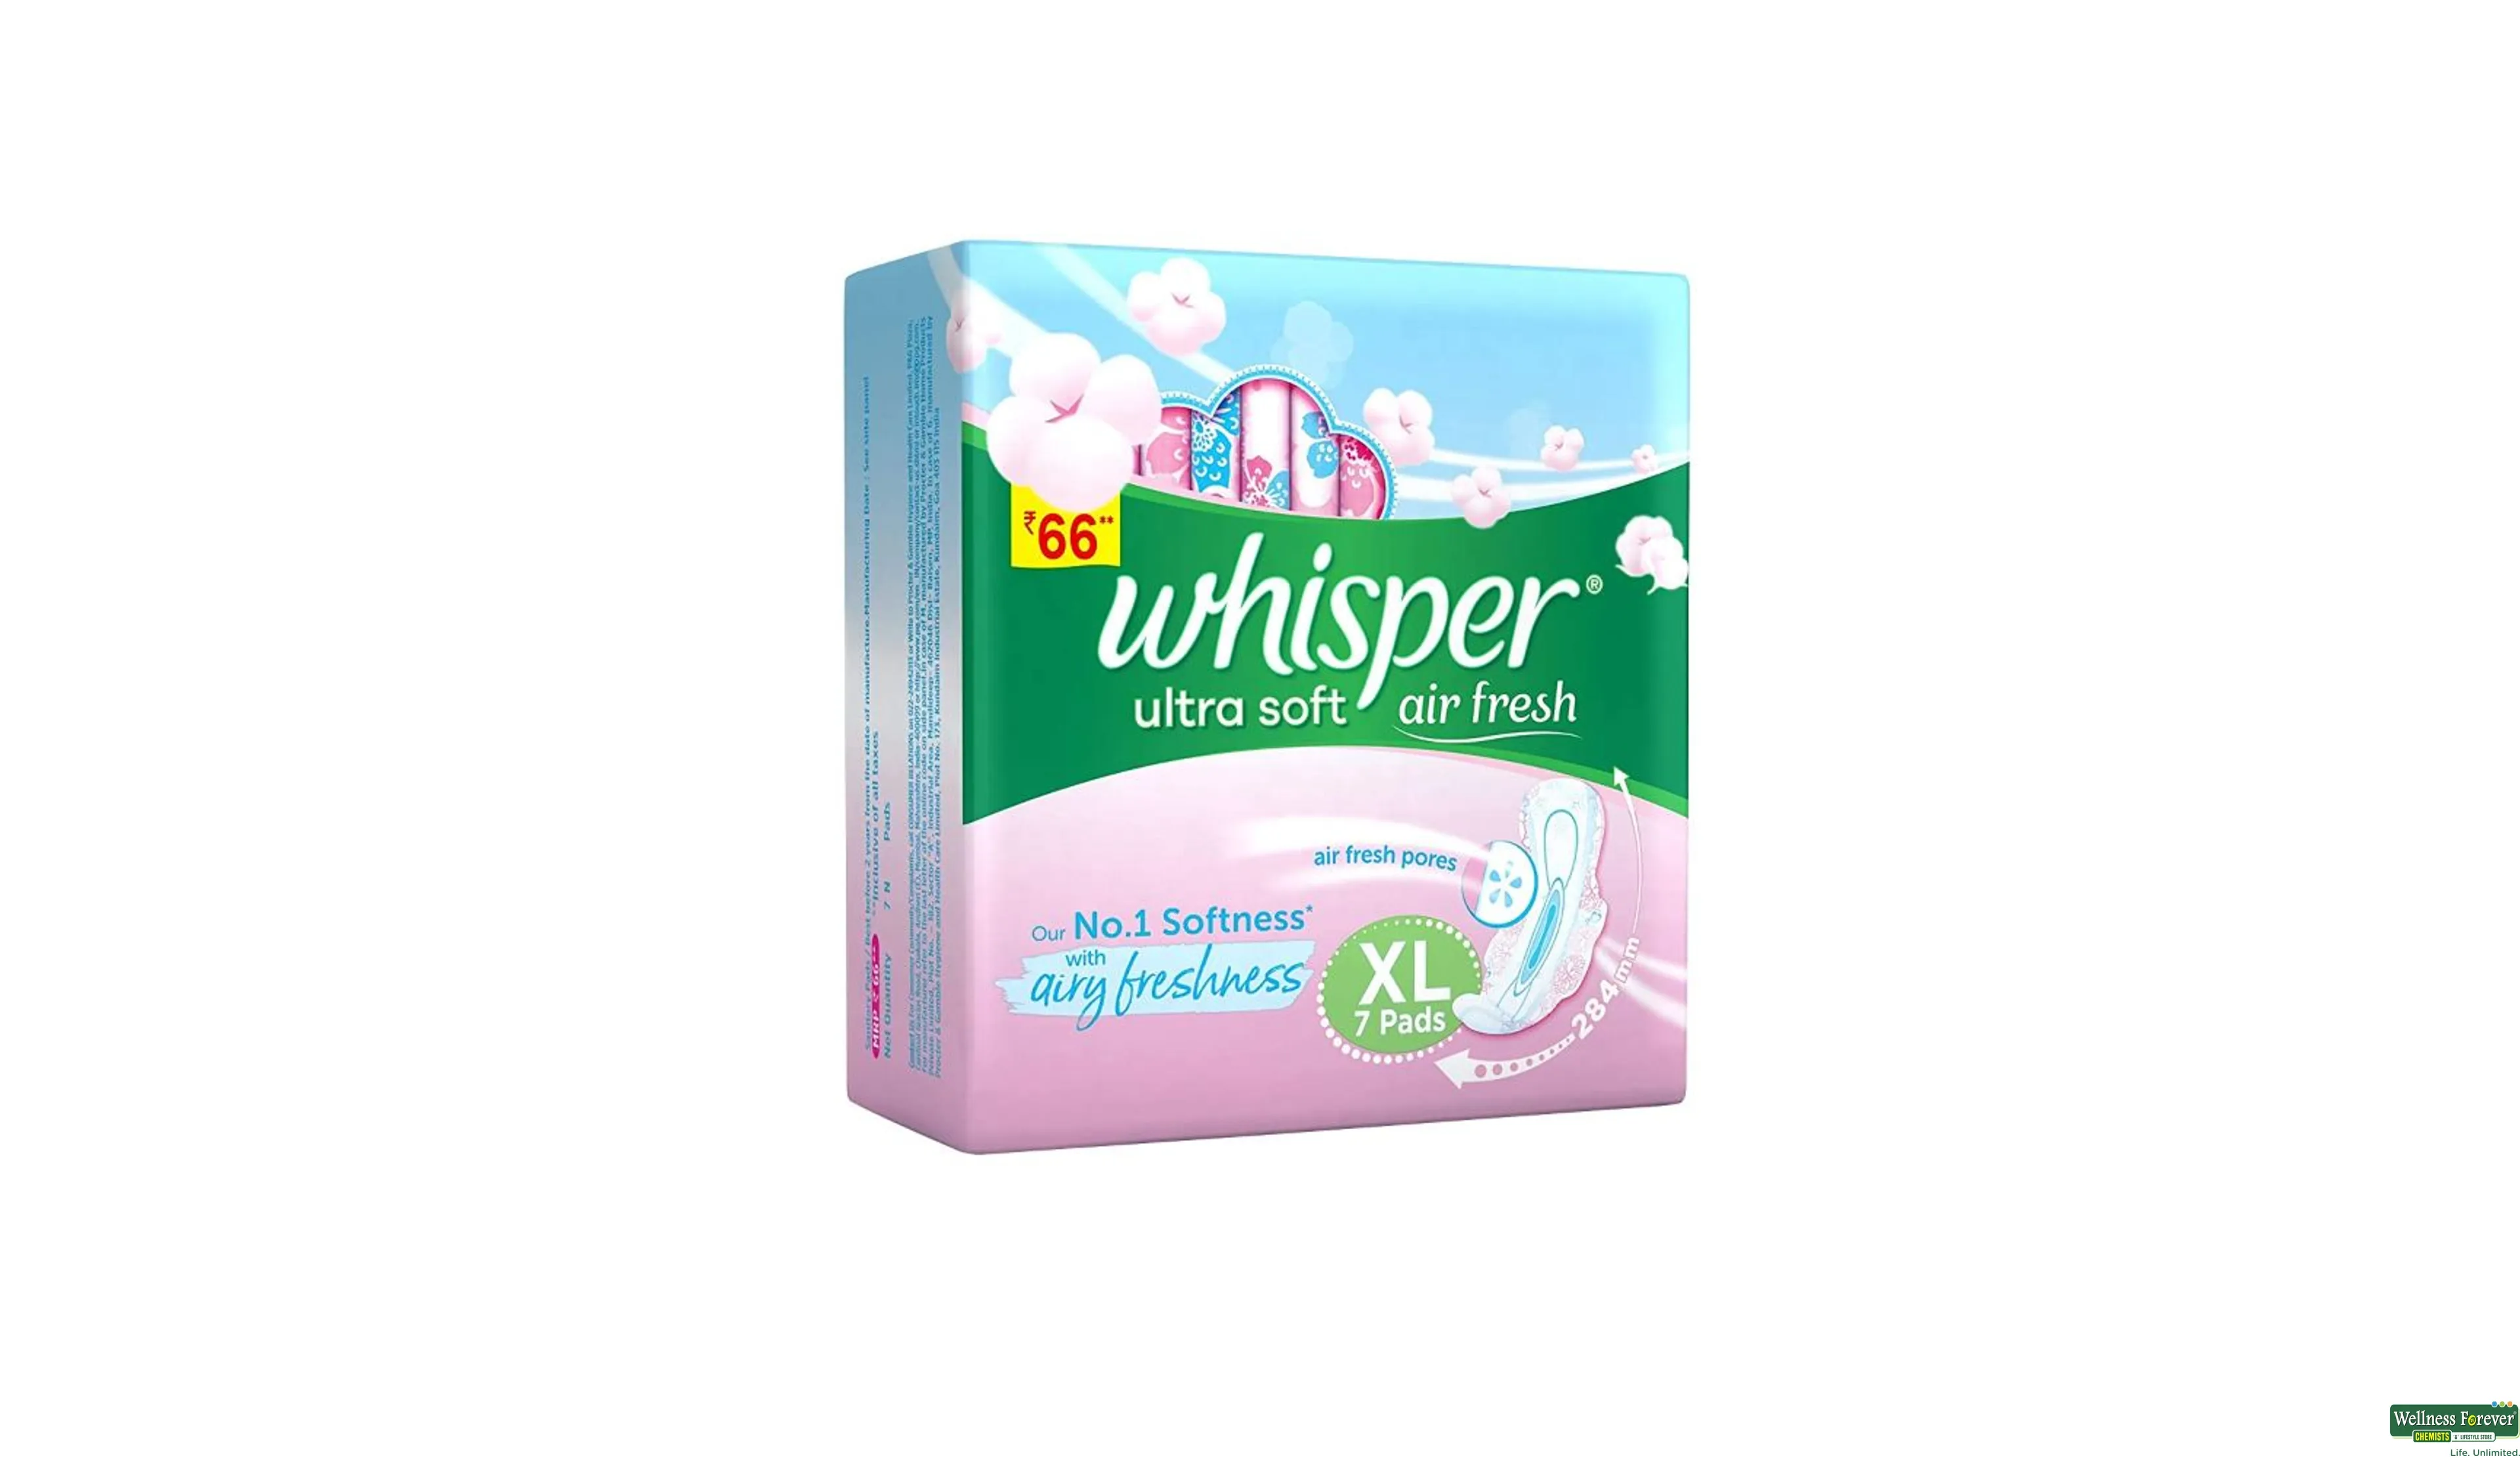 Buy Whisper Ultra Soft Sanitary Pads, XL, 7 pads Online at Best Prices